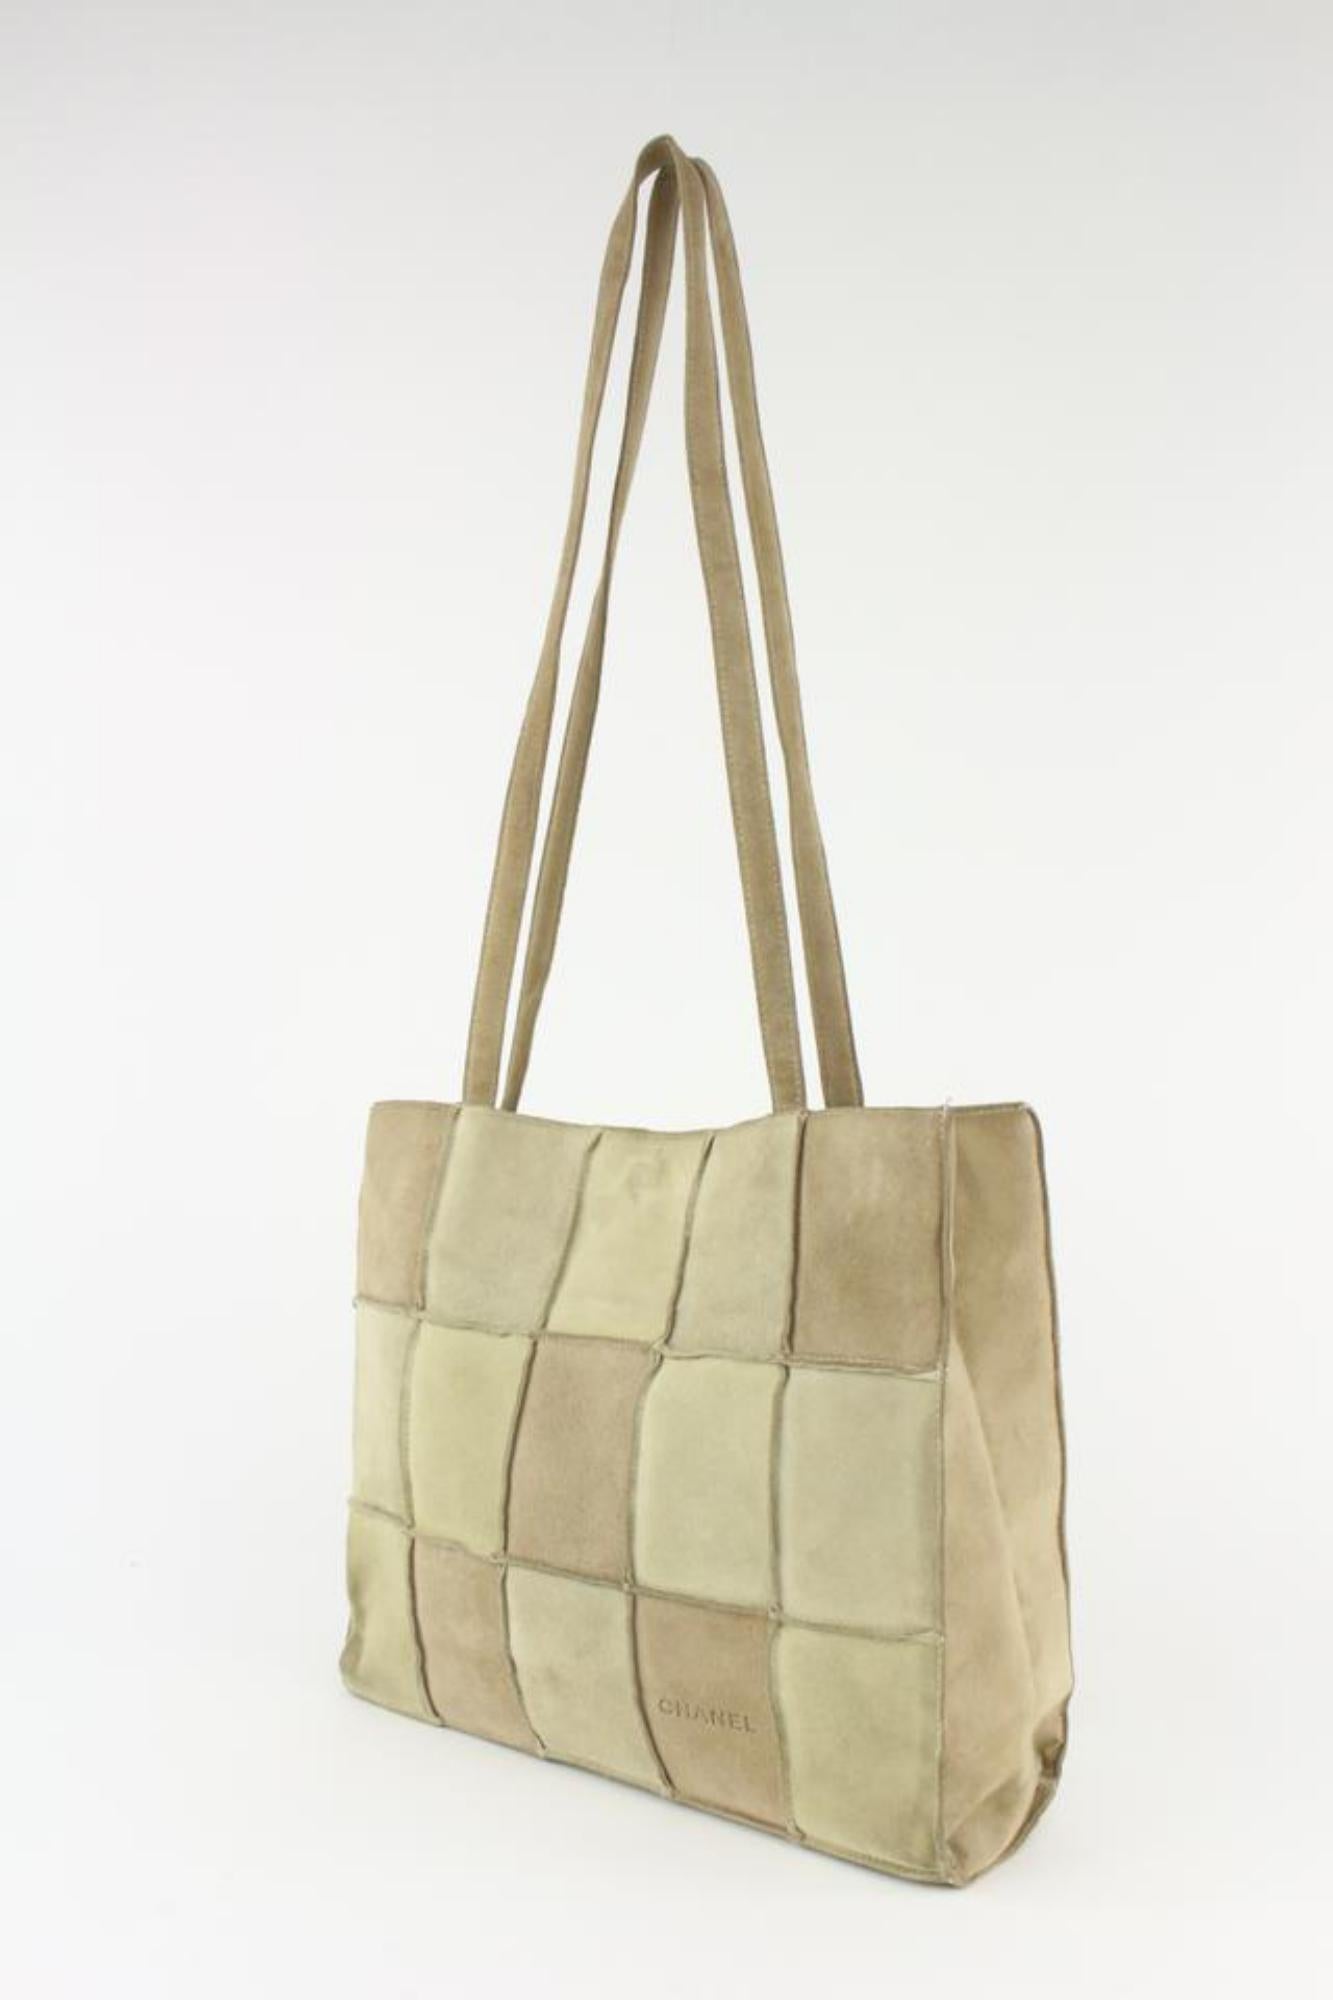 Chanel Beige Suede Patchwork Tote Bag 1130c11 For Sale 8